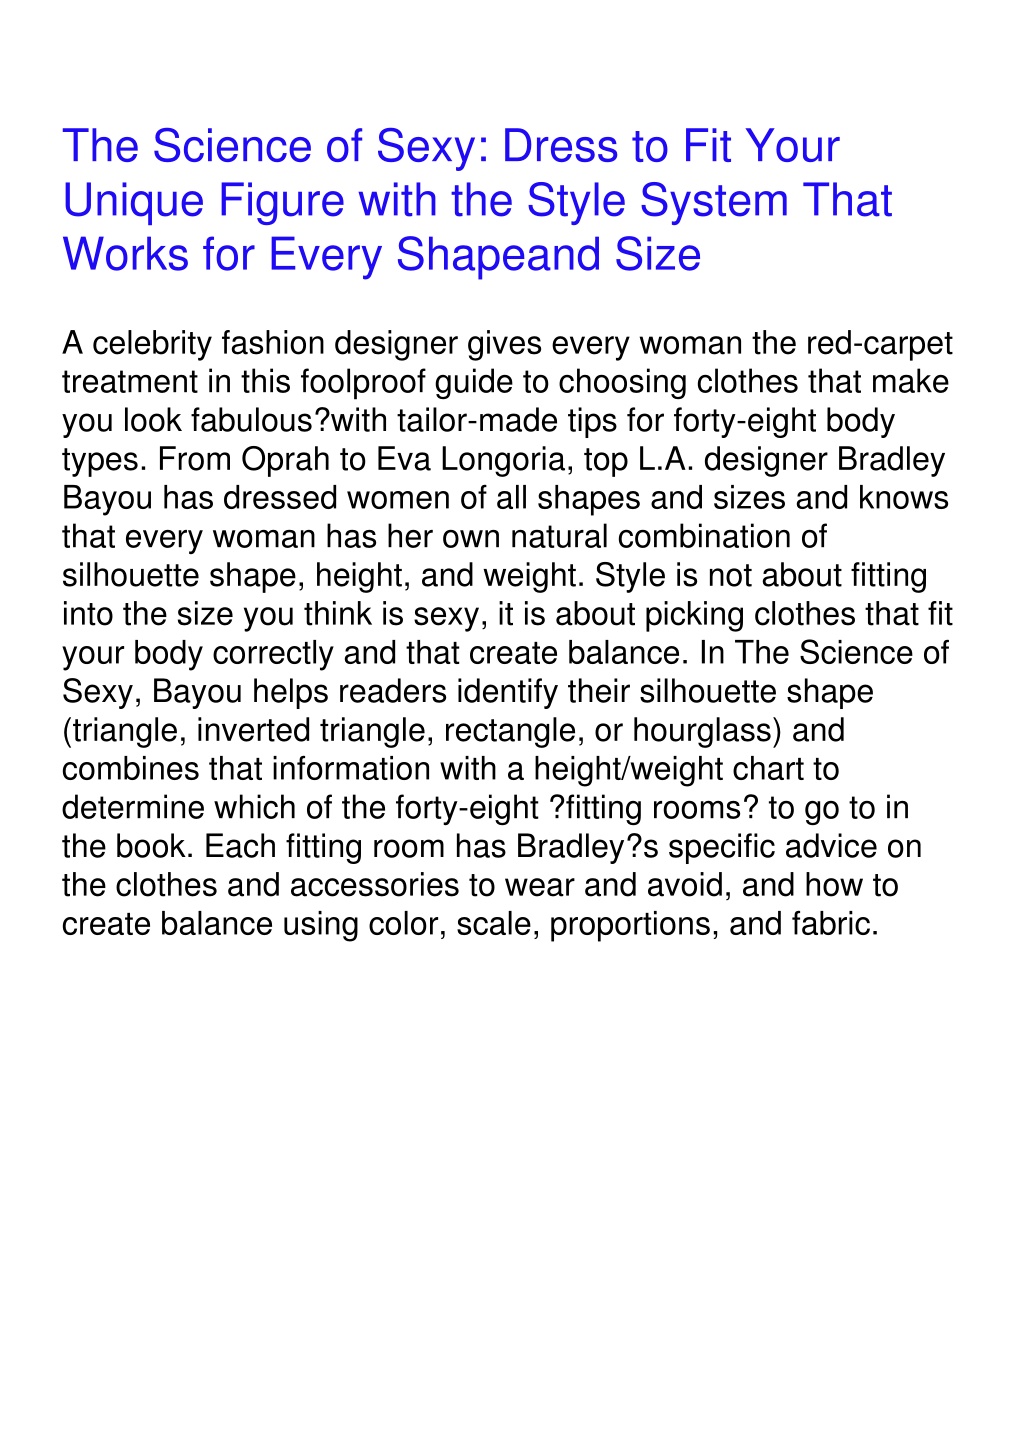 Ppt Epub The Science Of Sexy Dress To Fit Your Unique Figure With The Style System Powerpoint 